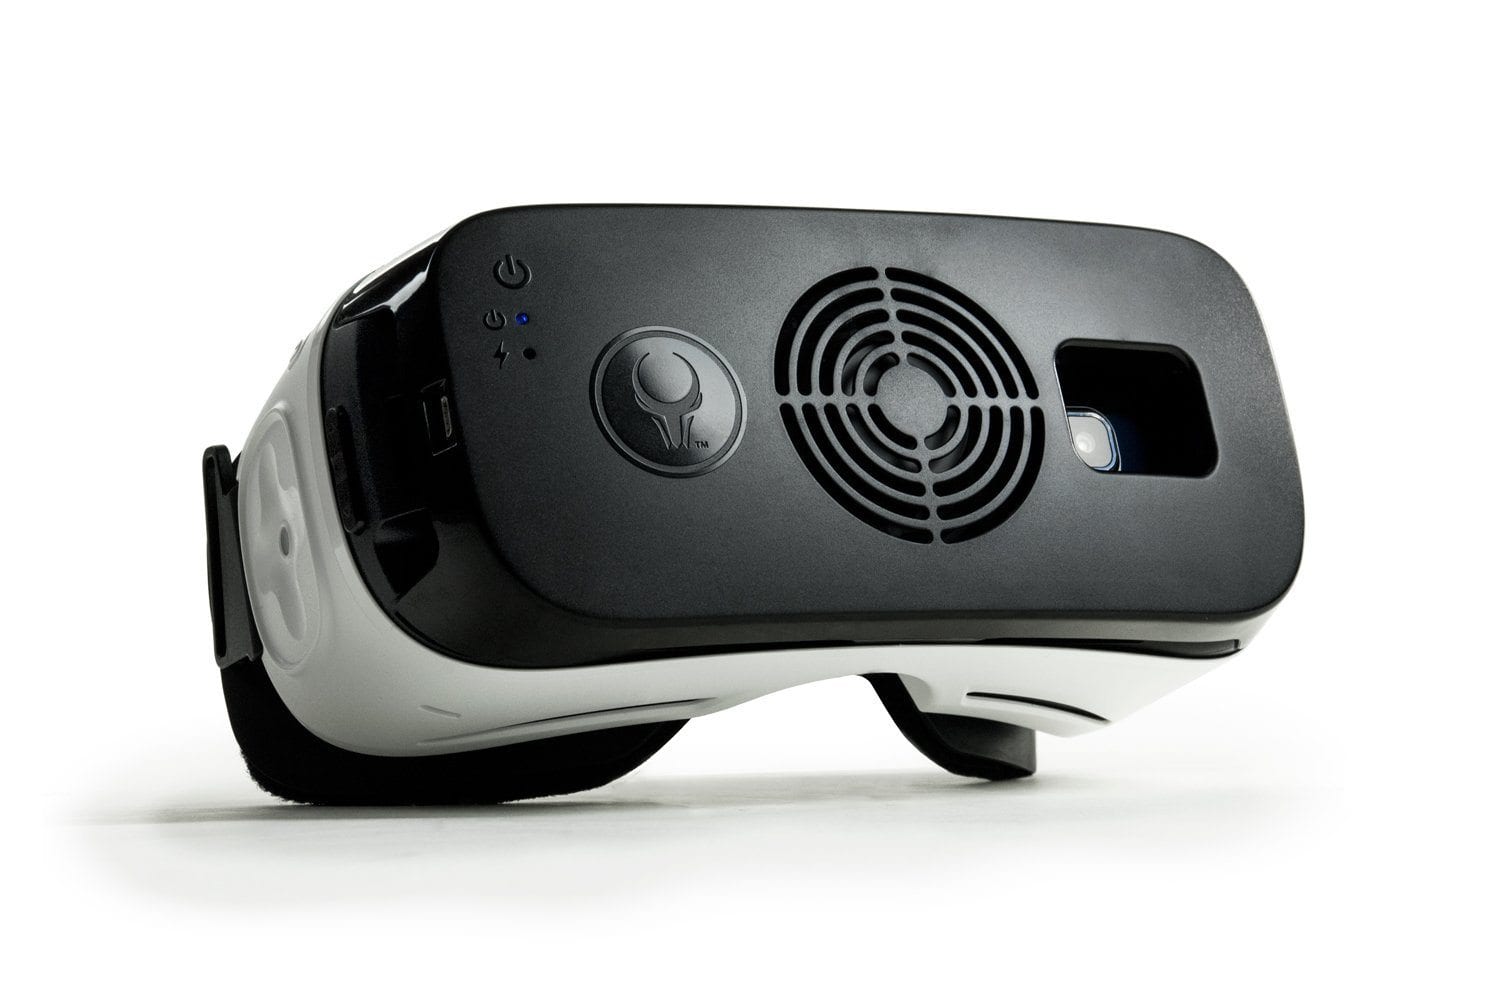 How To Deal With Gear Vr Overheating Issues Virtual Reality Hotspot